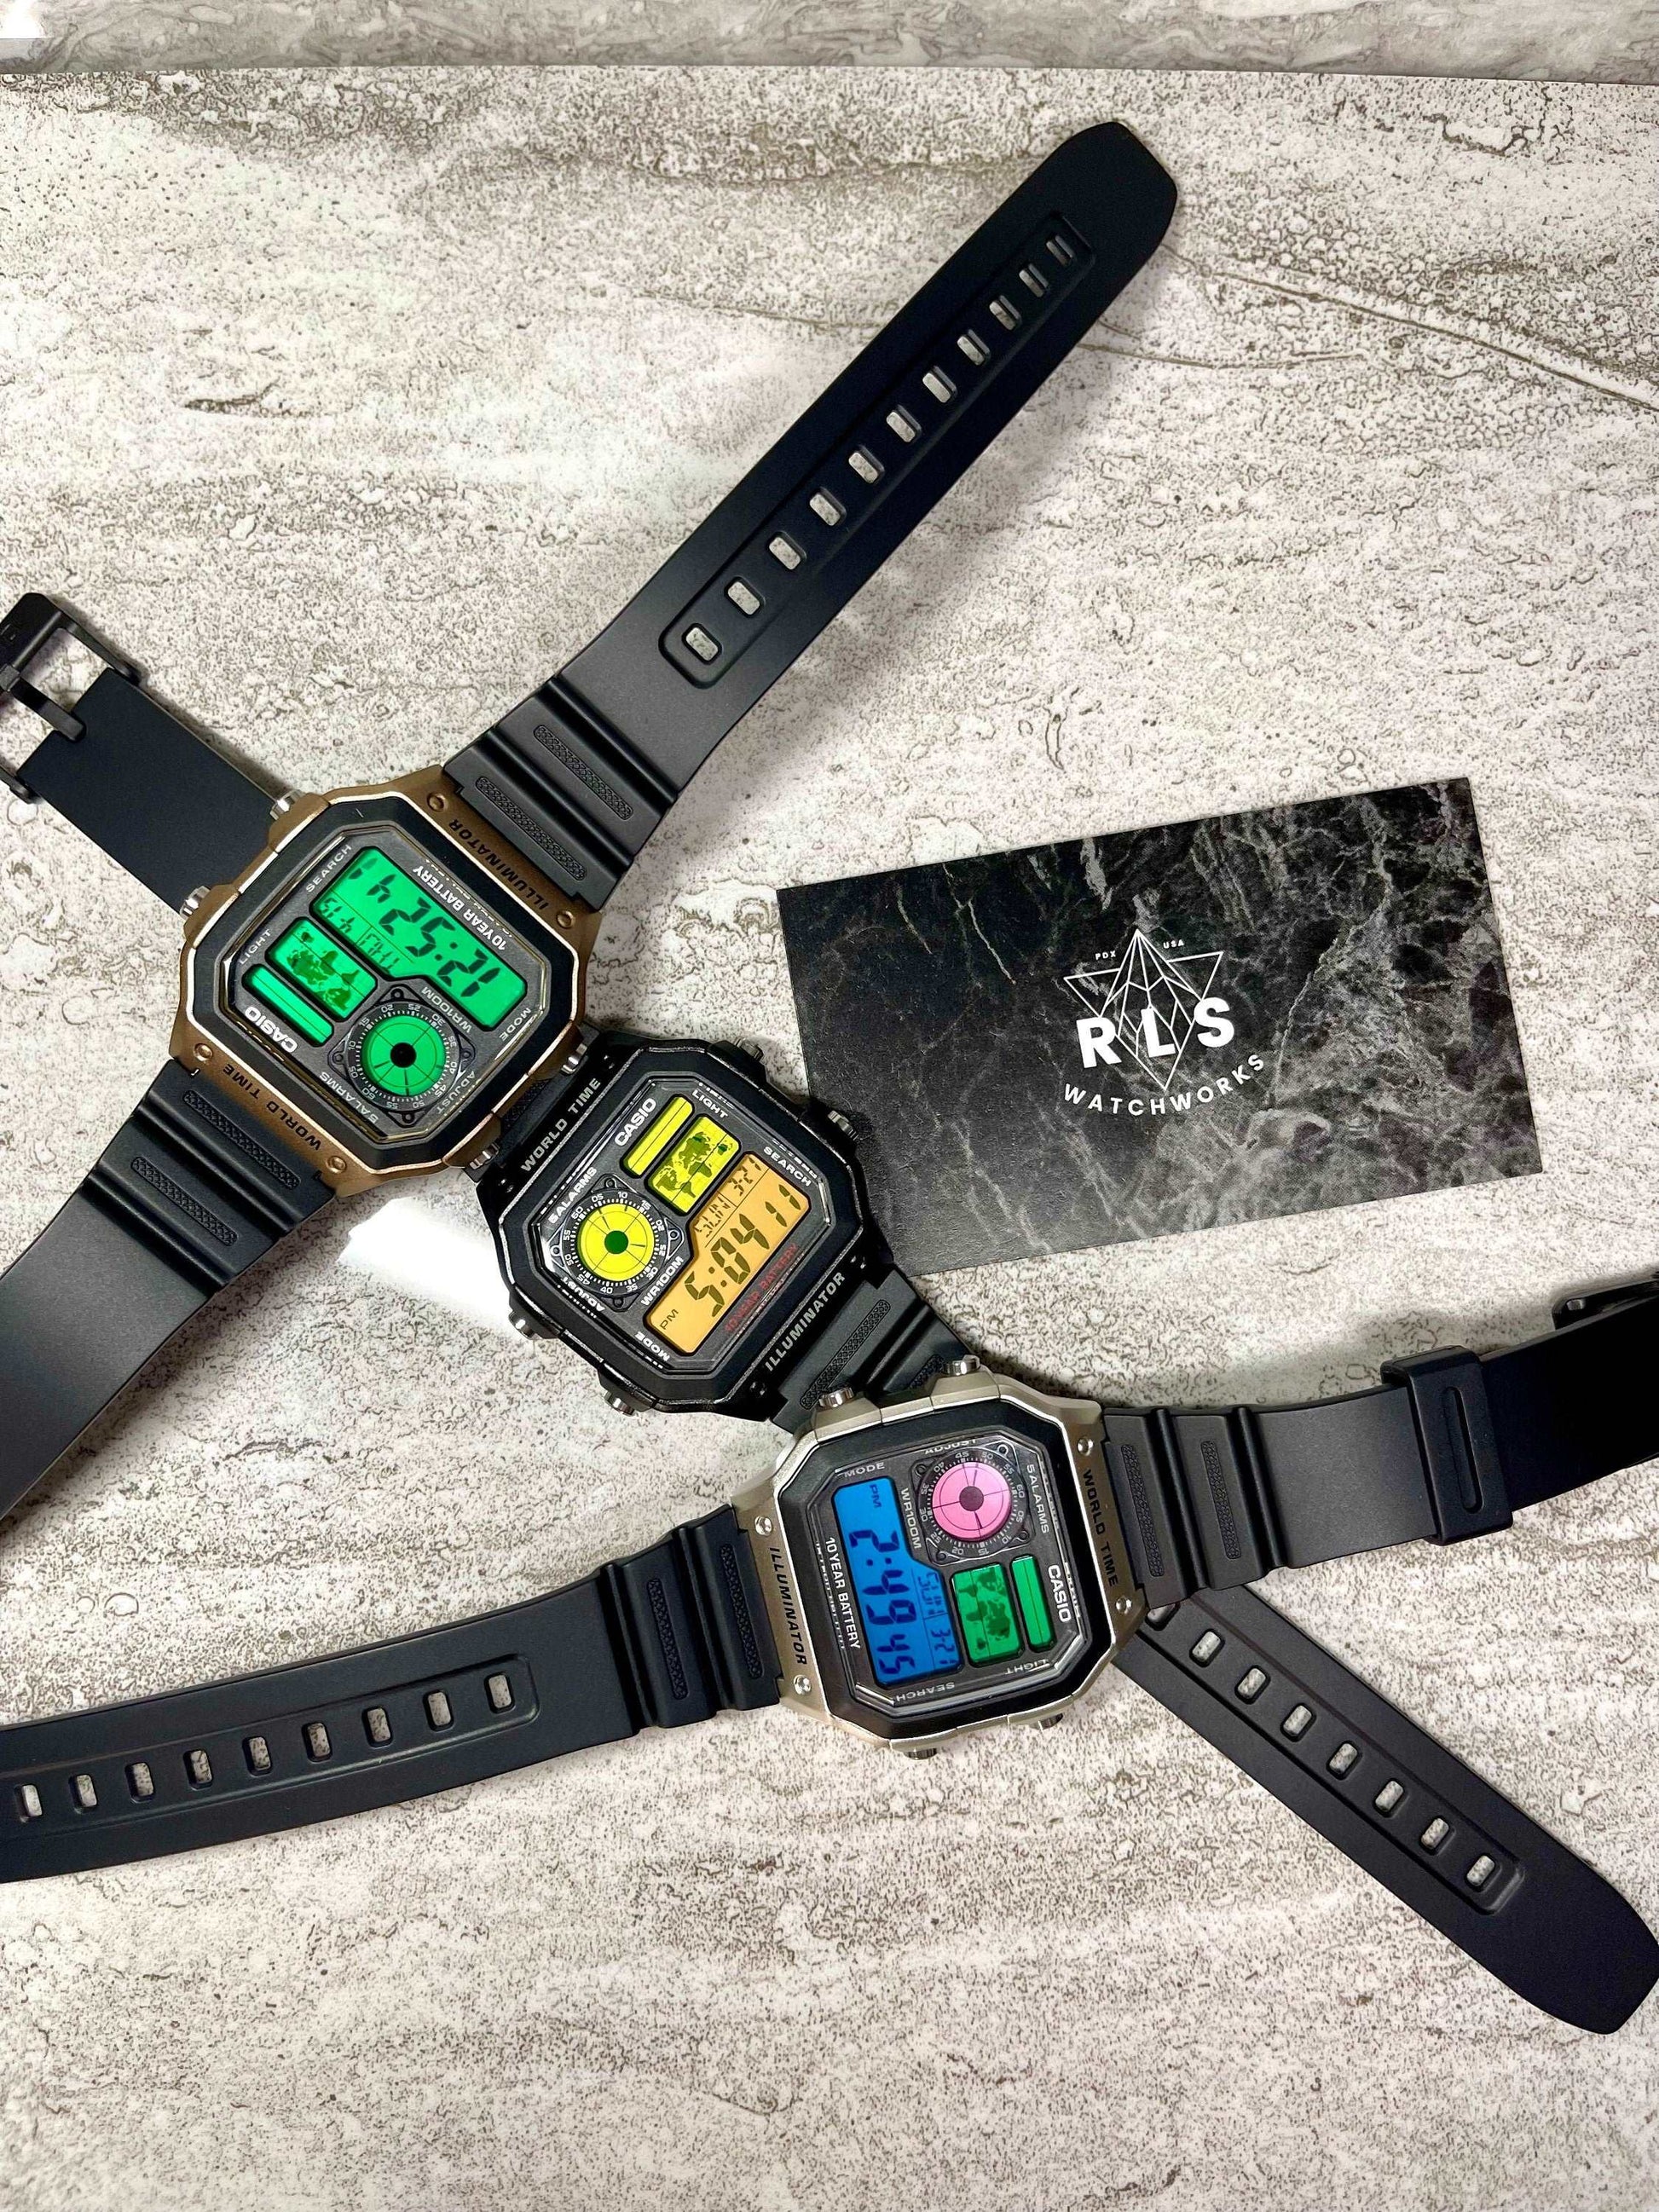 Custom Casio World Time Watch, Silver, Black, Gold with Color Screen Mod (Pick your colors)